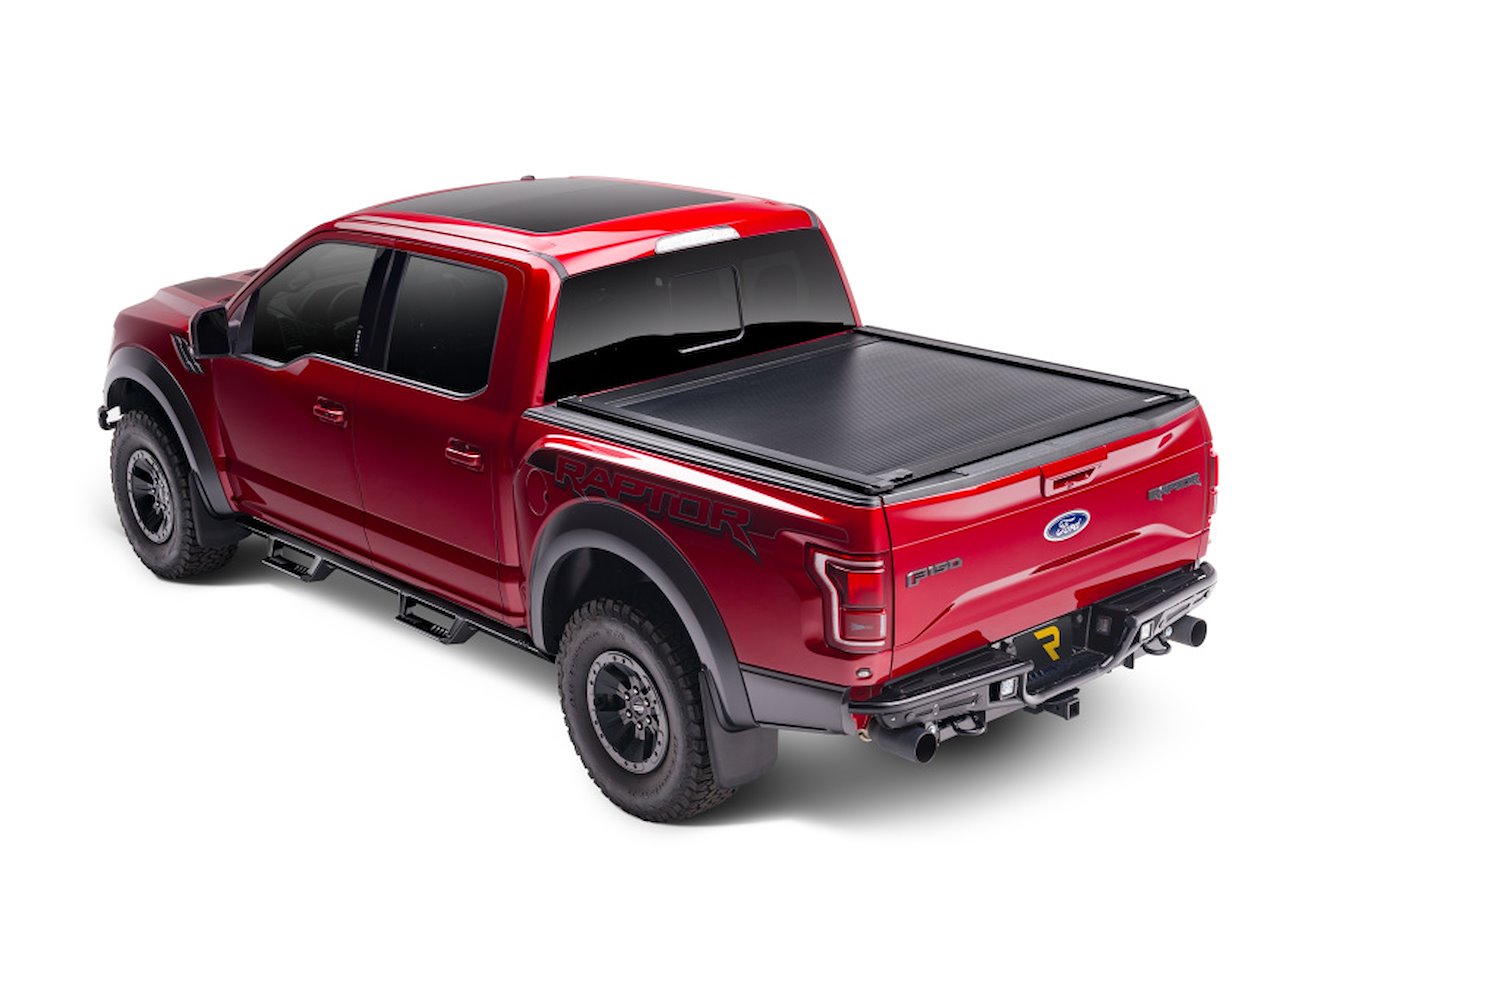 T-60232 RetraxOne XR Retractable Tonneau Cover Fits Select Ram 1500/2500/3500 6' 4" Bed without RamBox without Stake Pockets